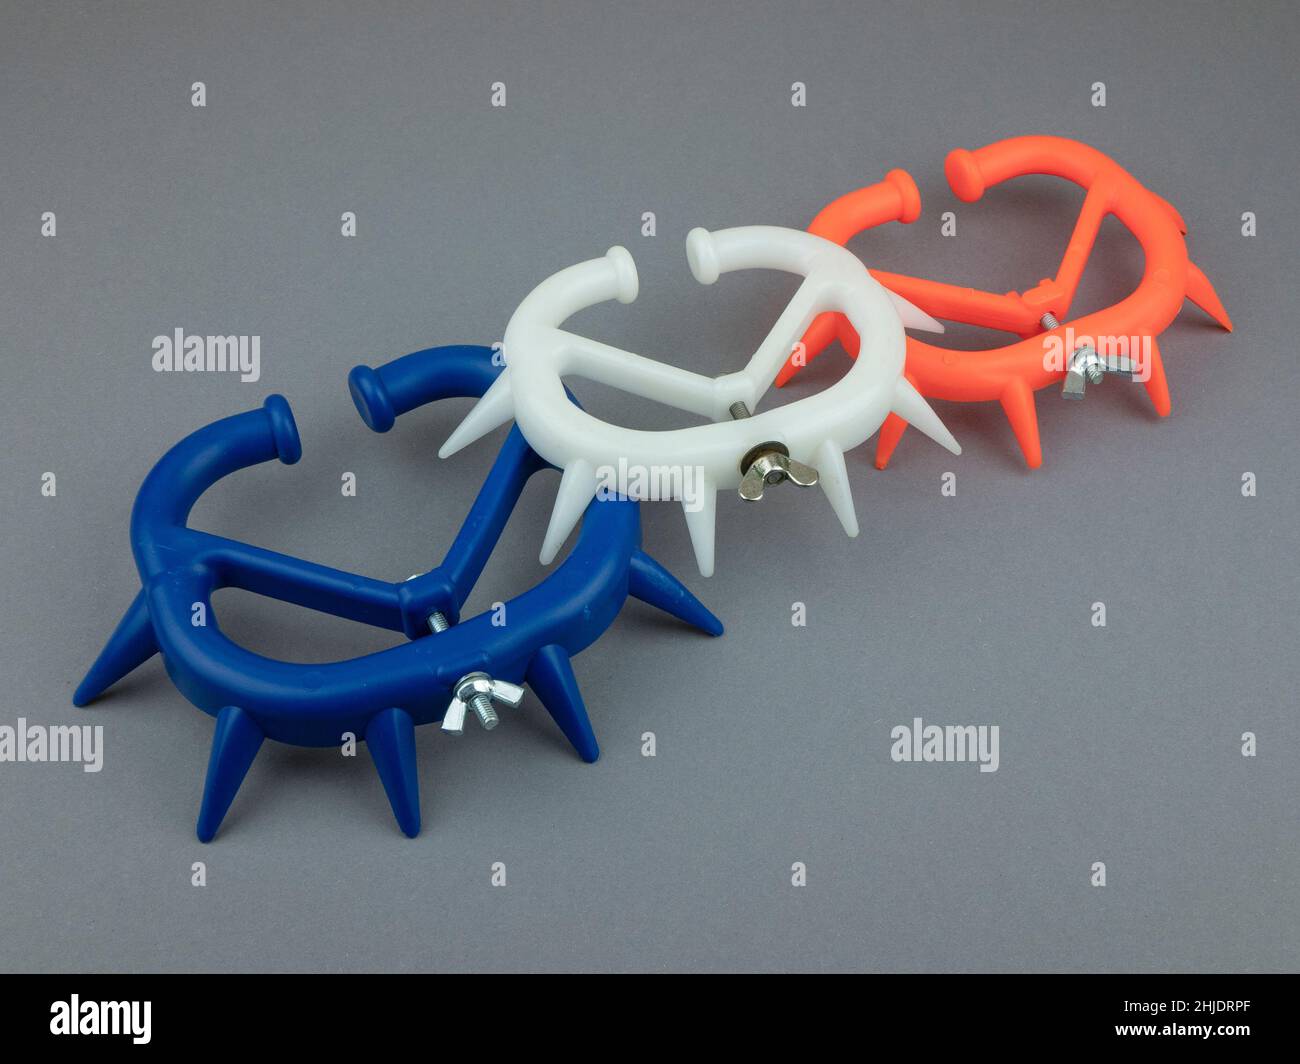 Different sized weaning rings that prevent calves from sucking. Calf weaning ring of bright orange, blue and white plastic on the gray background Stock Photo